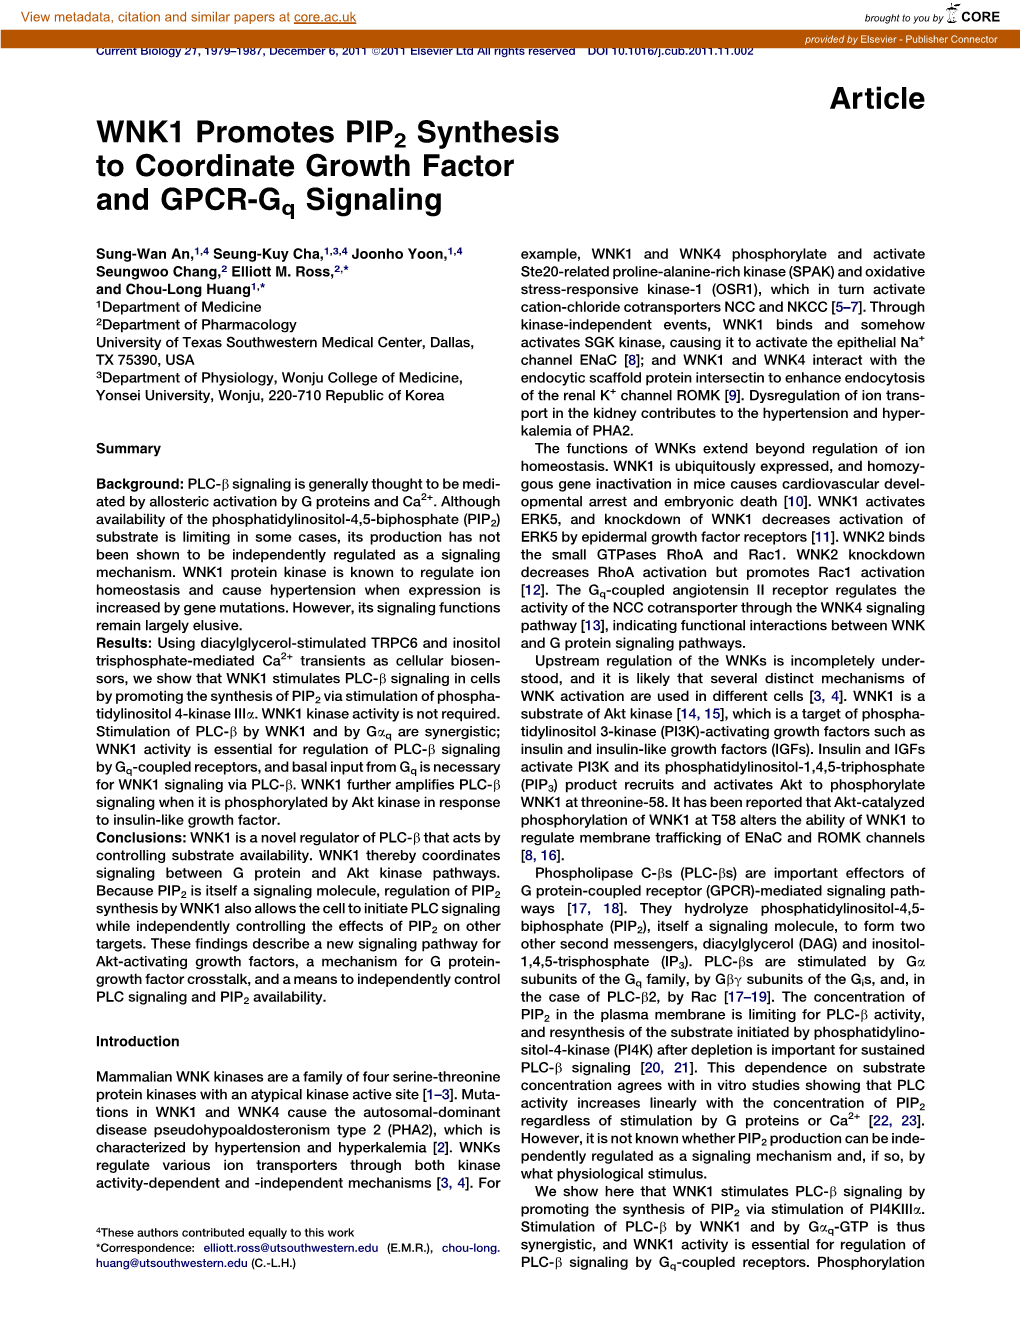 WNK1 Promotes PIP2 Synthesis to Coordinate Growth Factor and GPCR-Gq Signaling